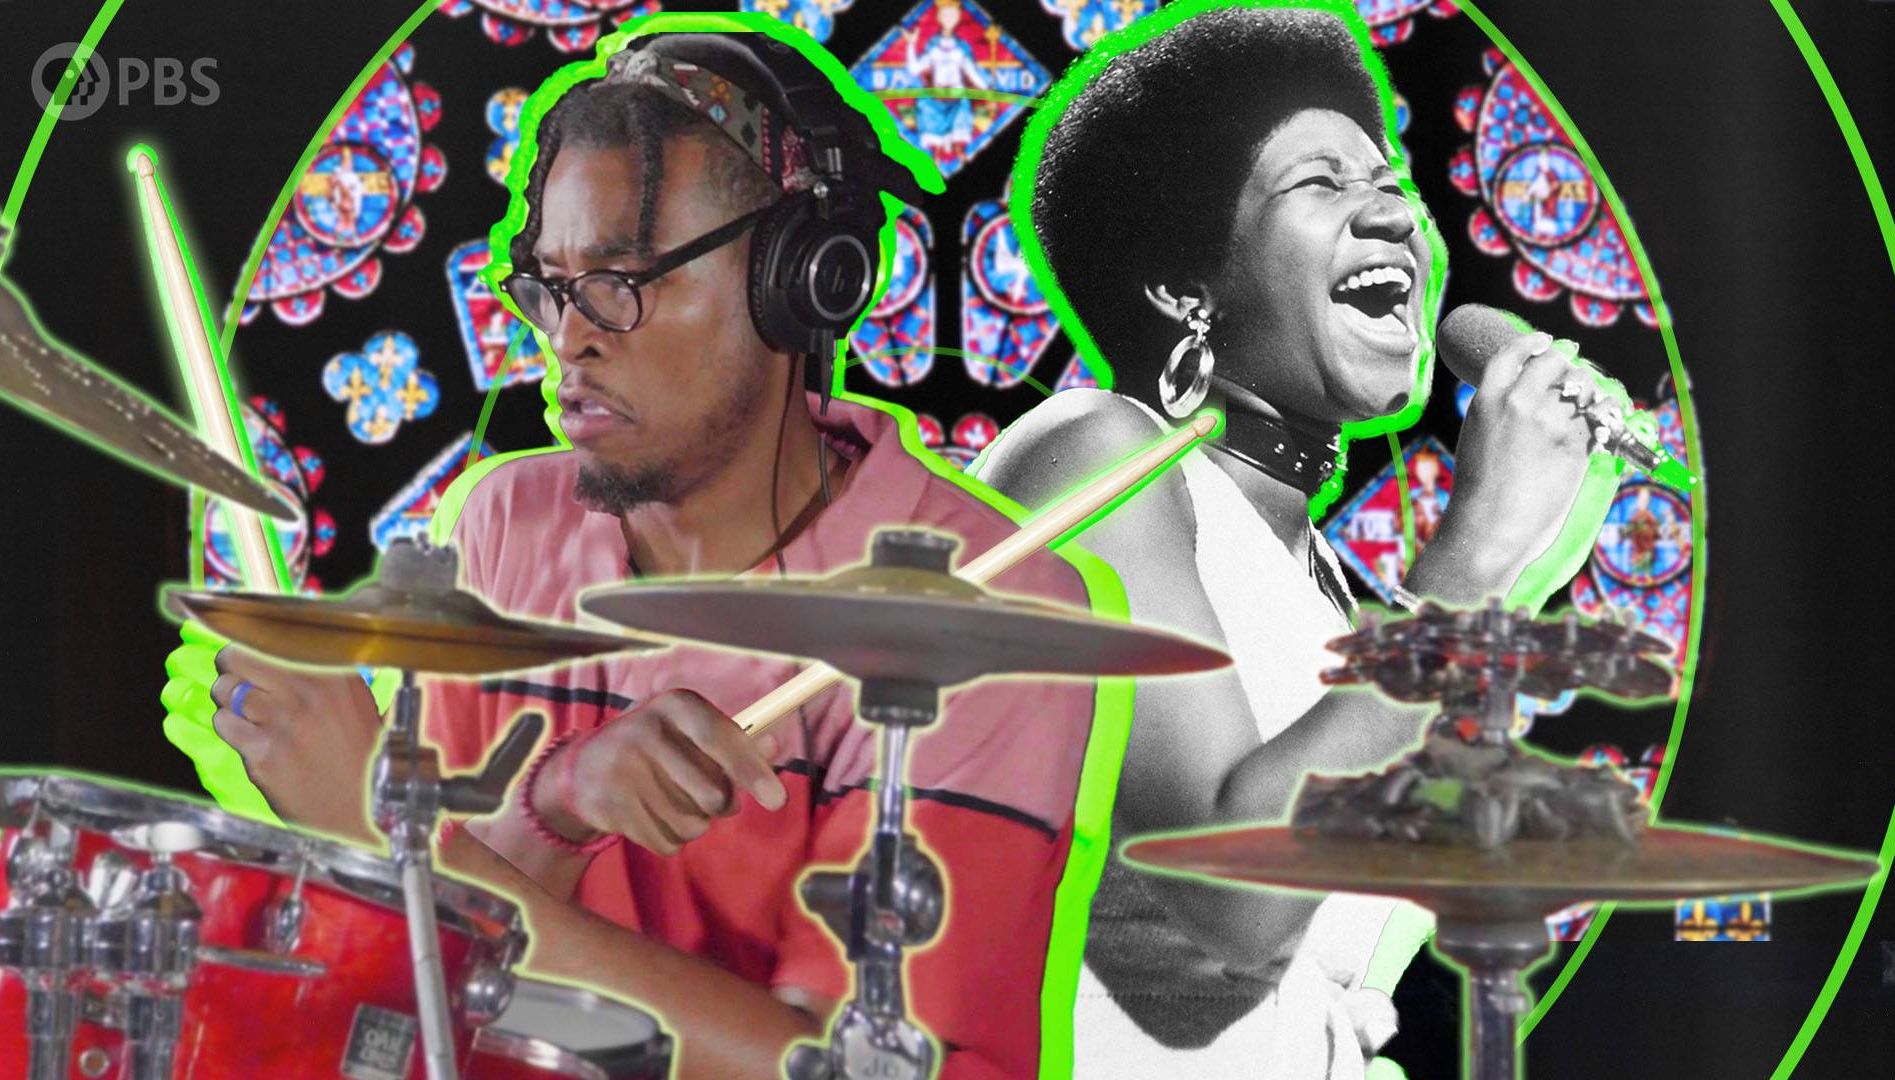 Graphic mosaic combining a color image of a man playing drums and a black and white image of Aretha Franklin. Rewire PBS Gospel